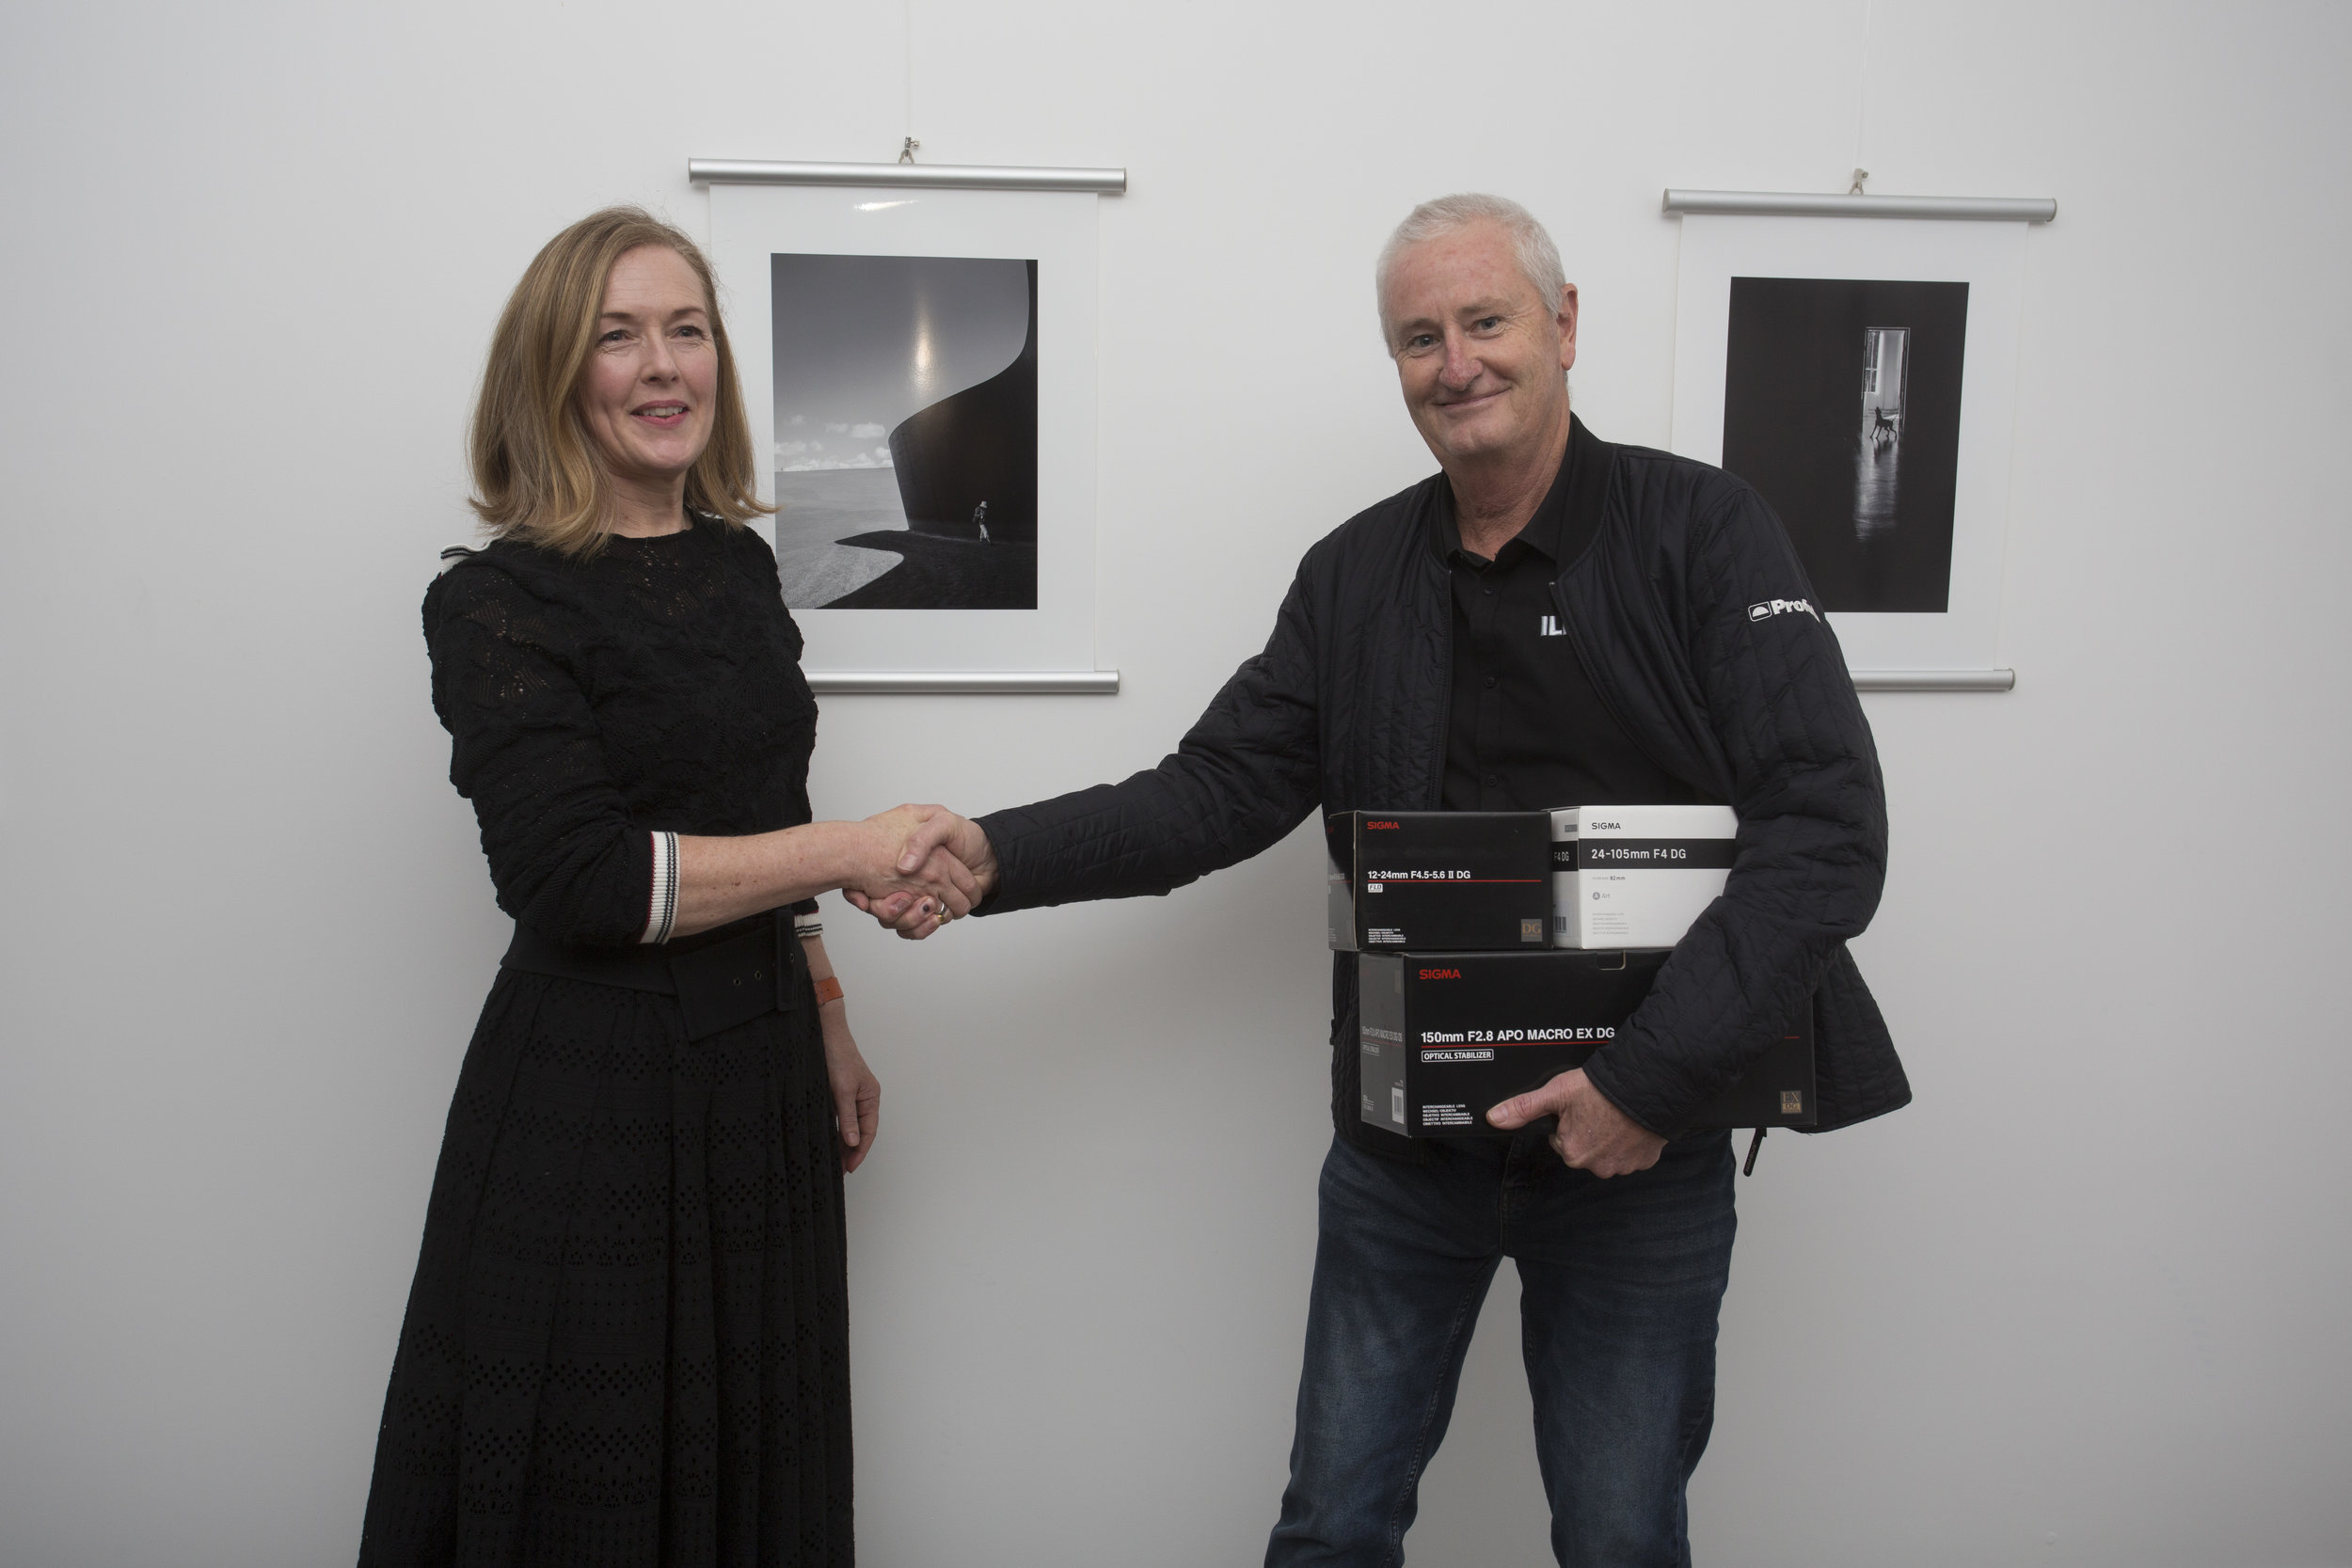  Amateur Photographer of the Year for 2018, Kate Parsonson, with her two winning images, receiving prizes from Mark Ward of Sigma/CRK 